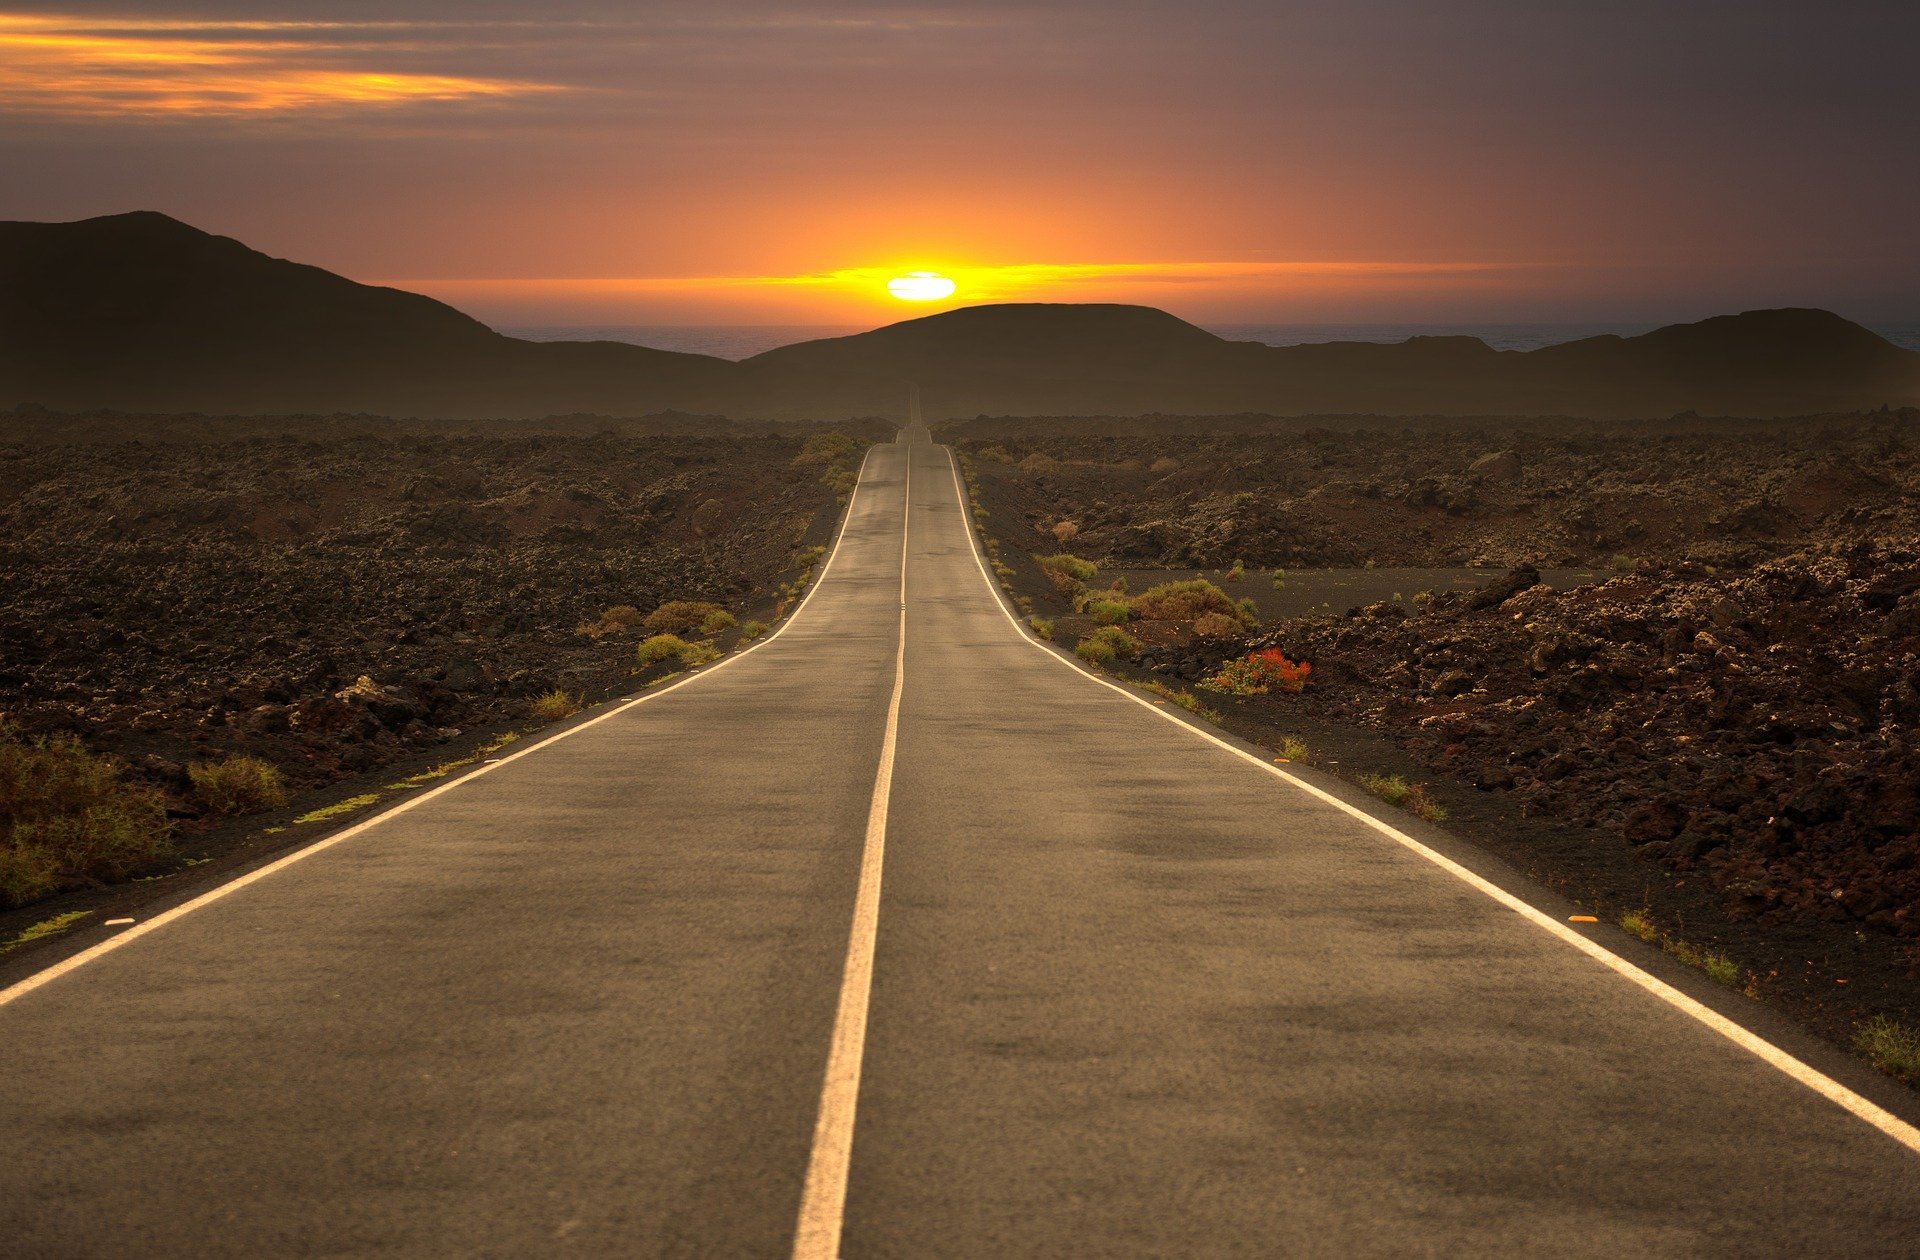 Road leading towards sunset over mountain